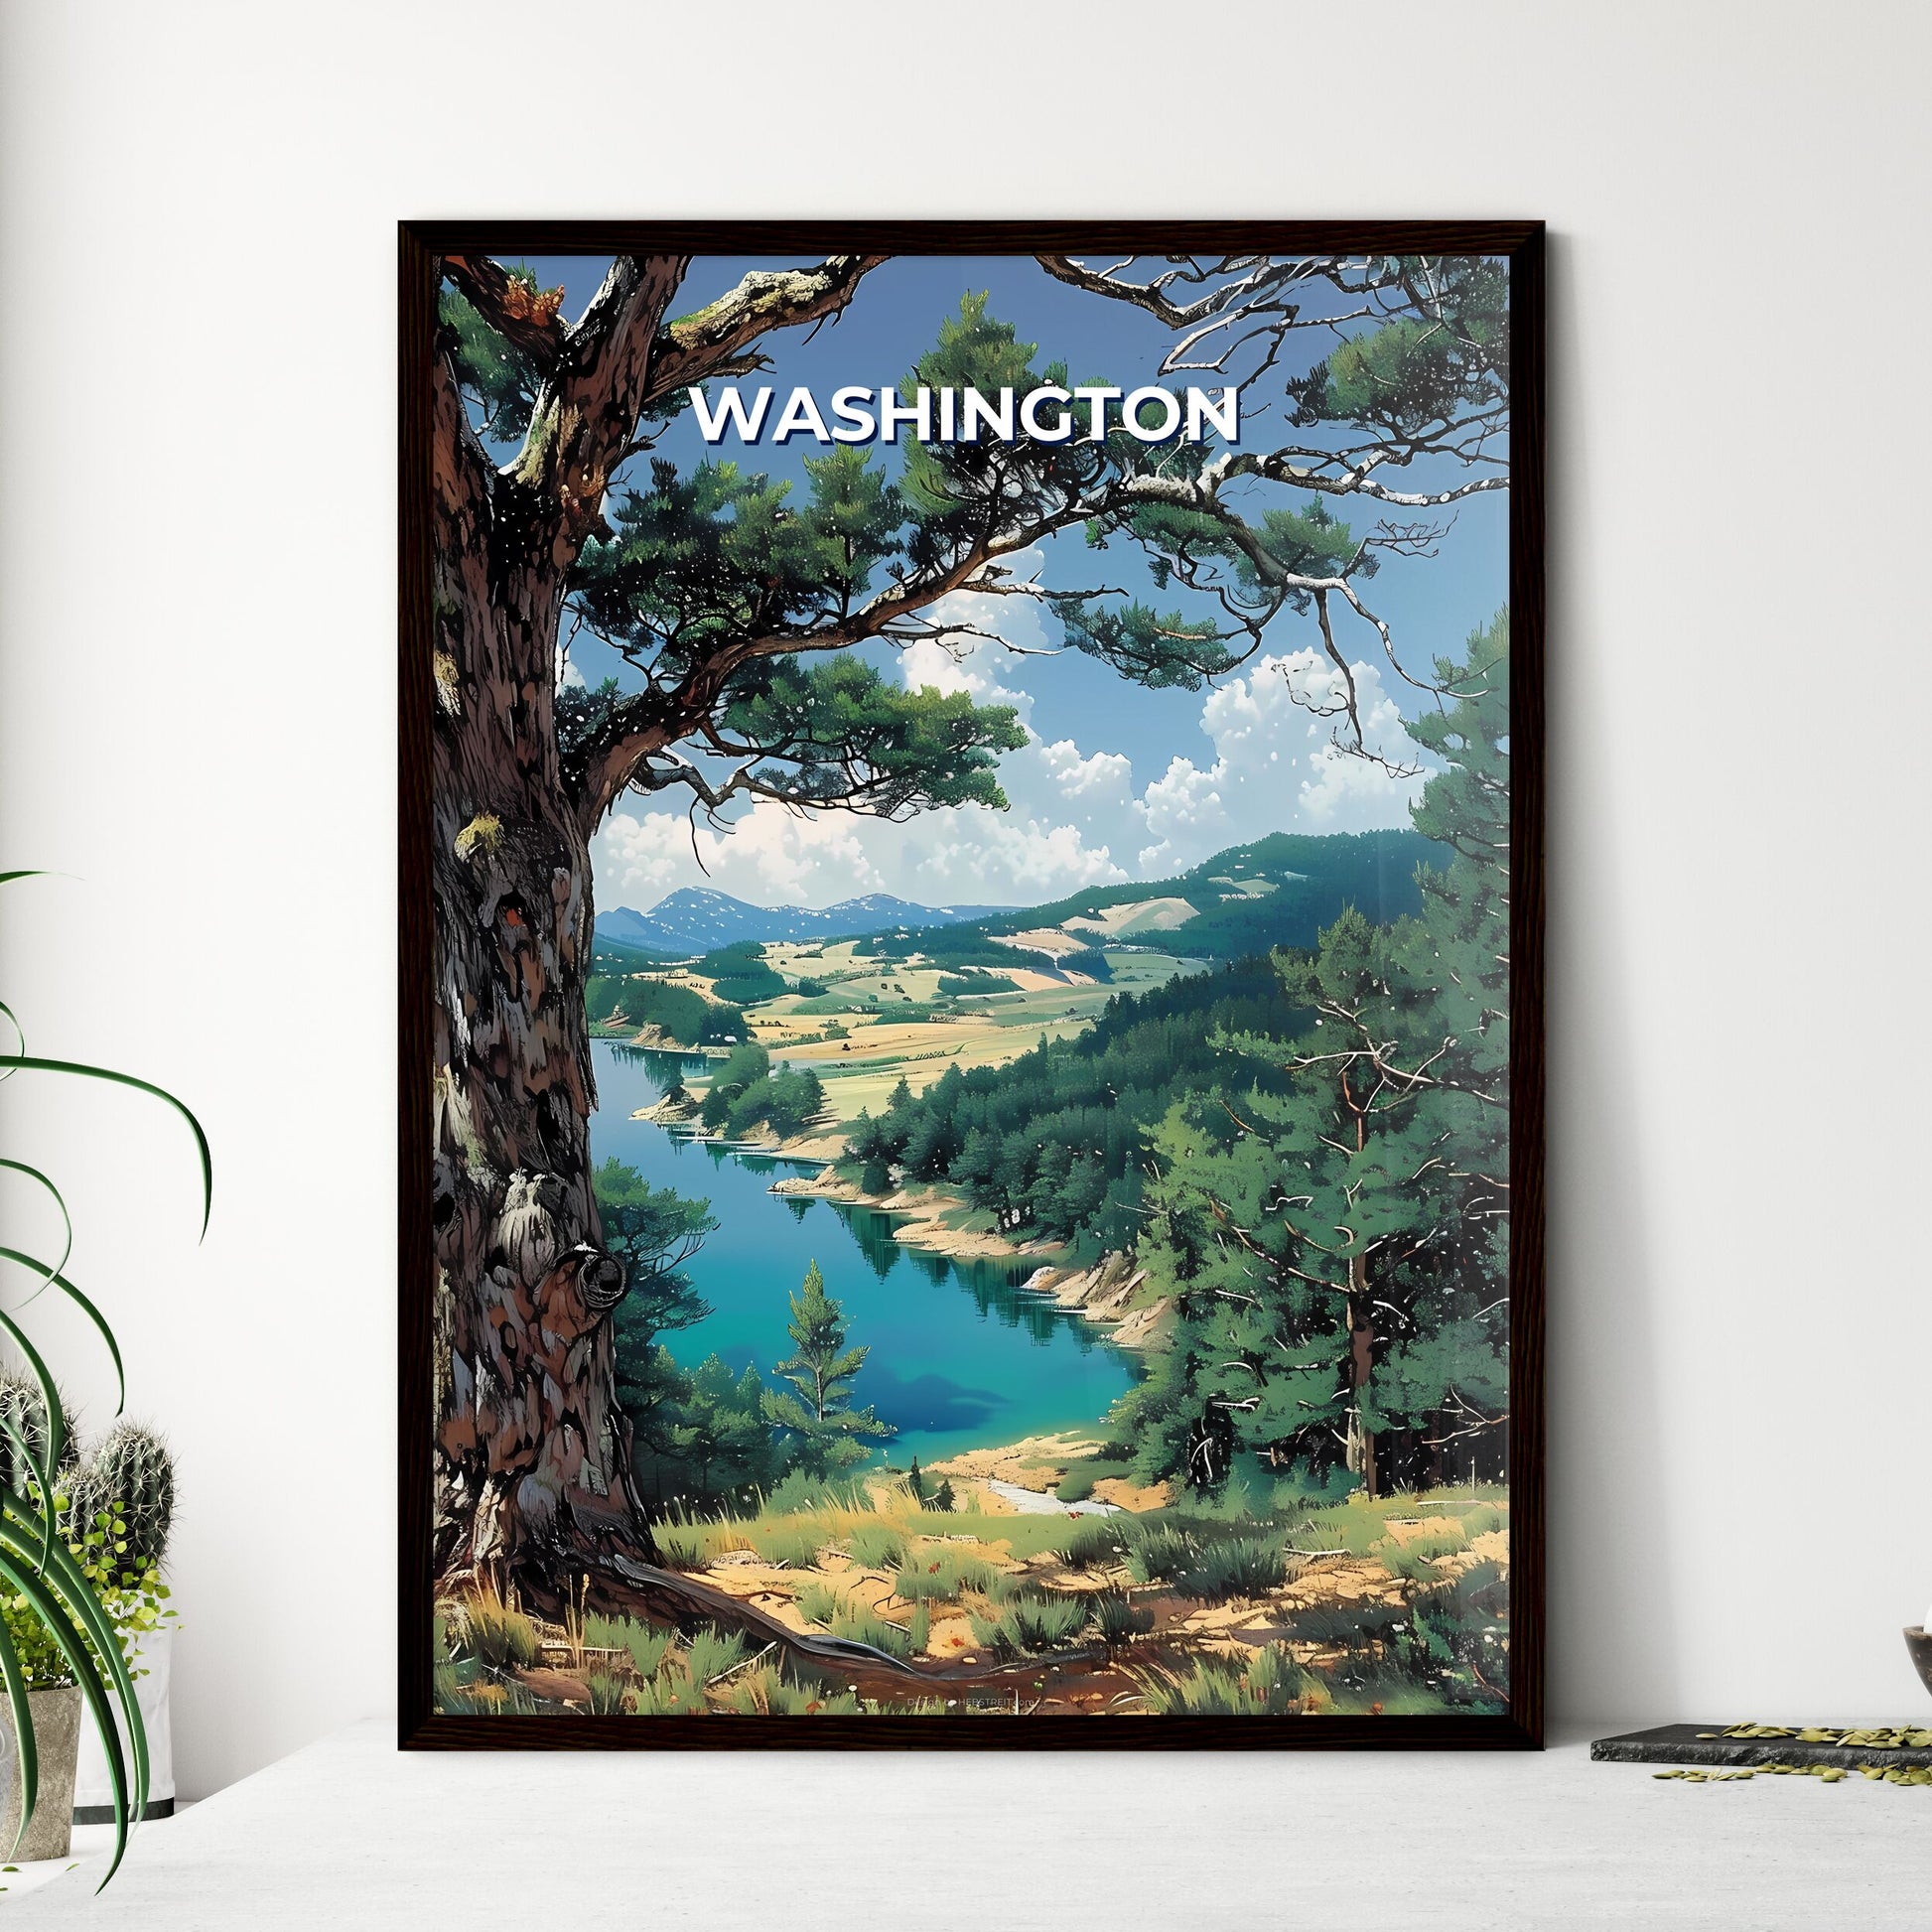 Vibrant Painting of a Washington Landscape: Scenic Lake and Trees